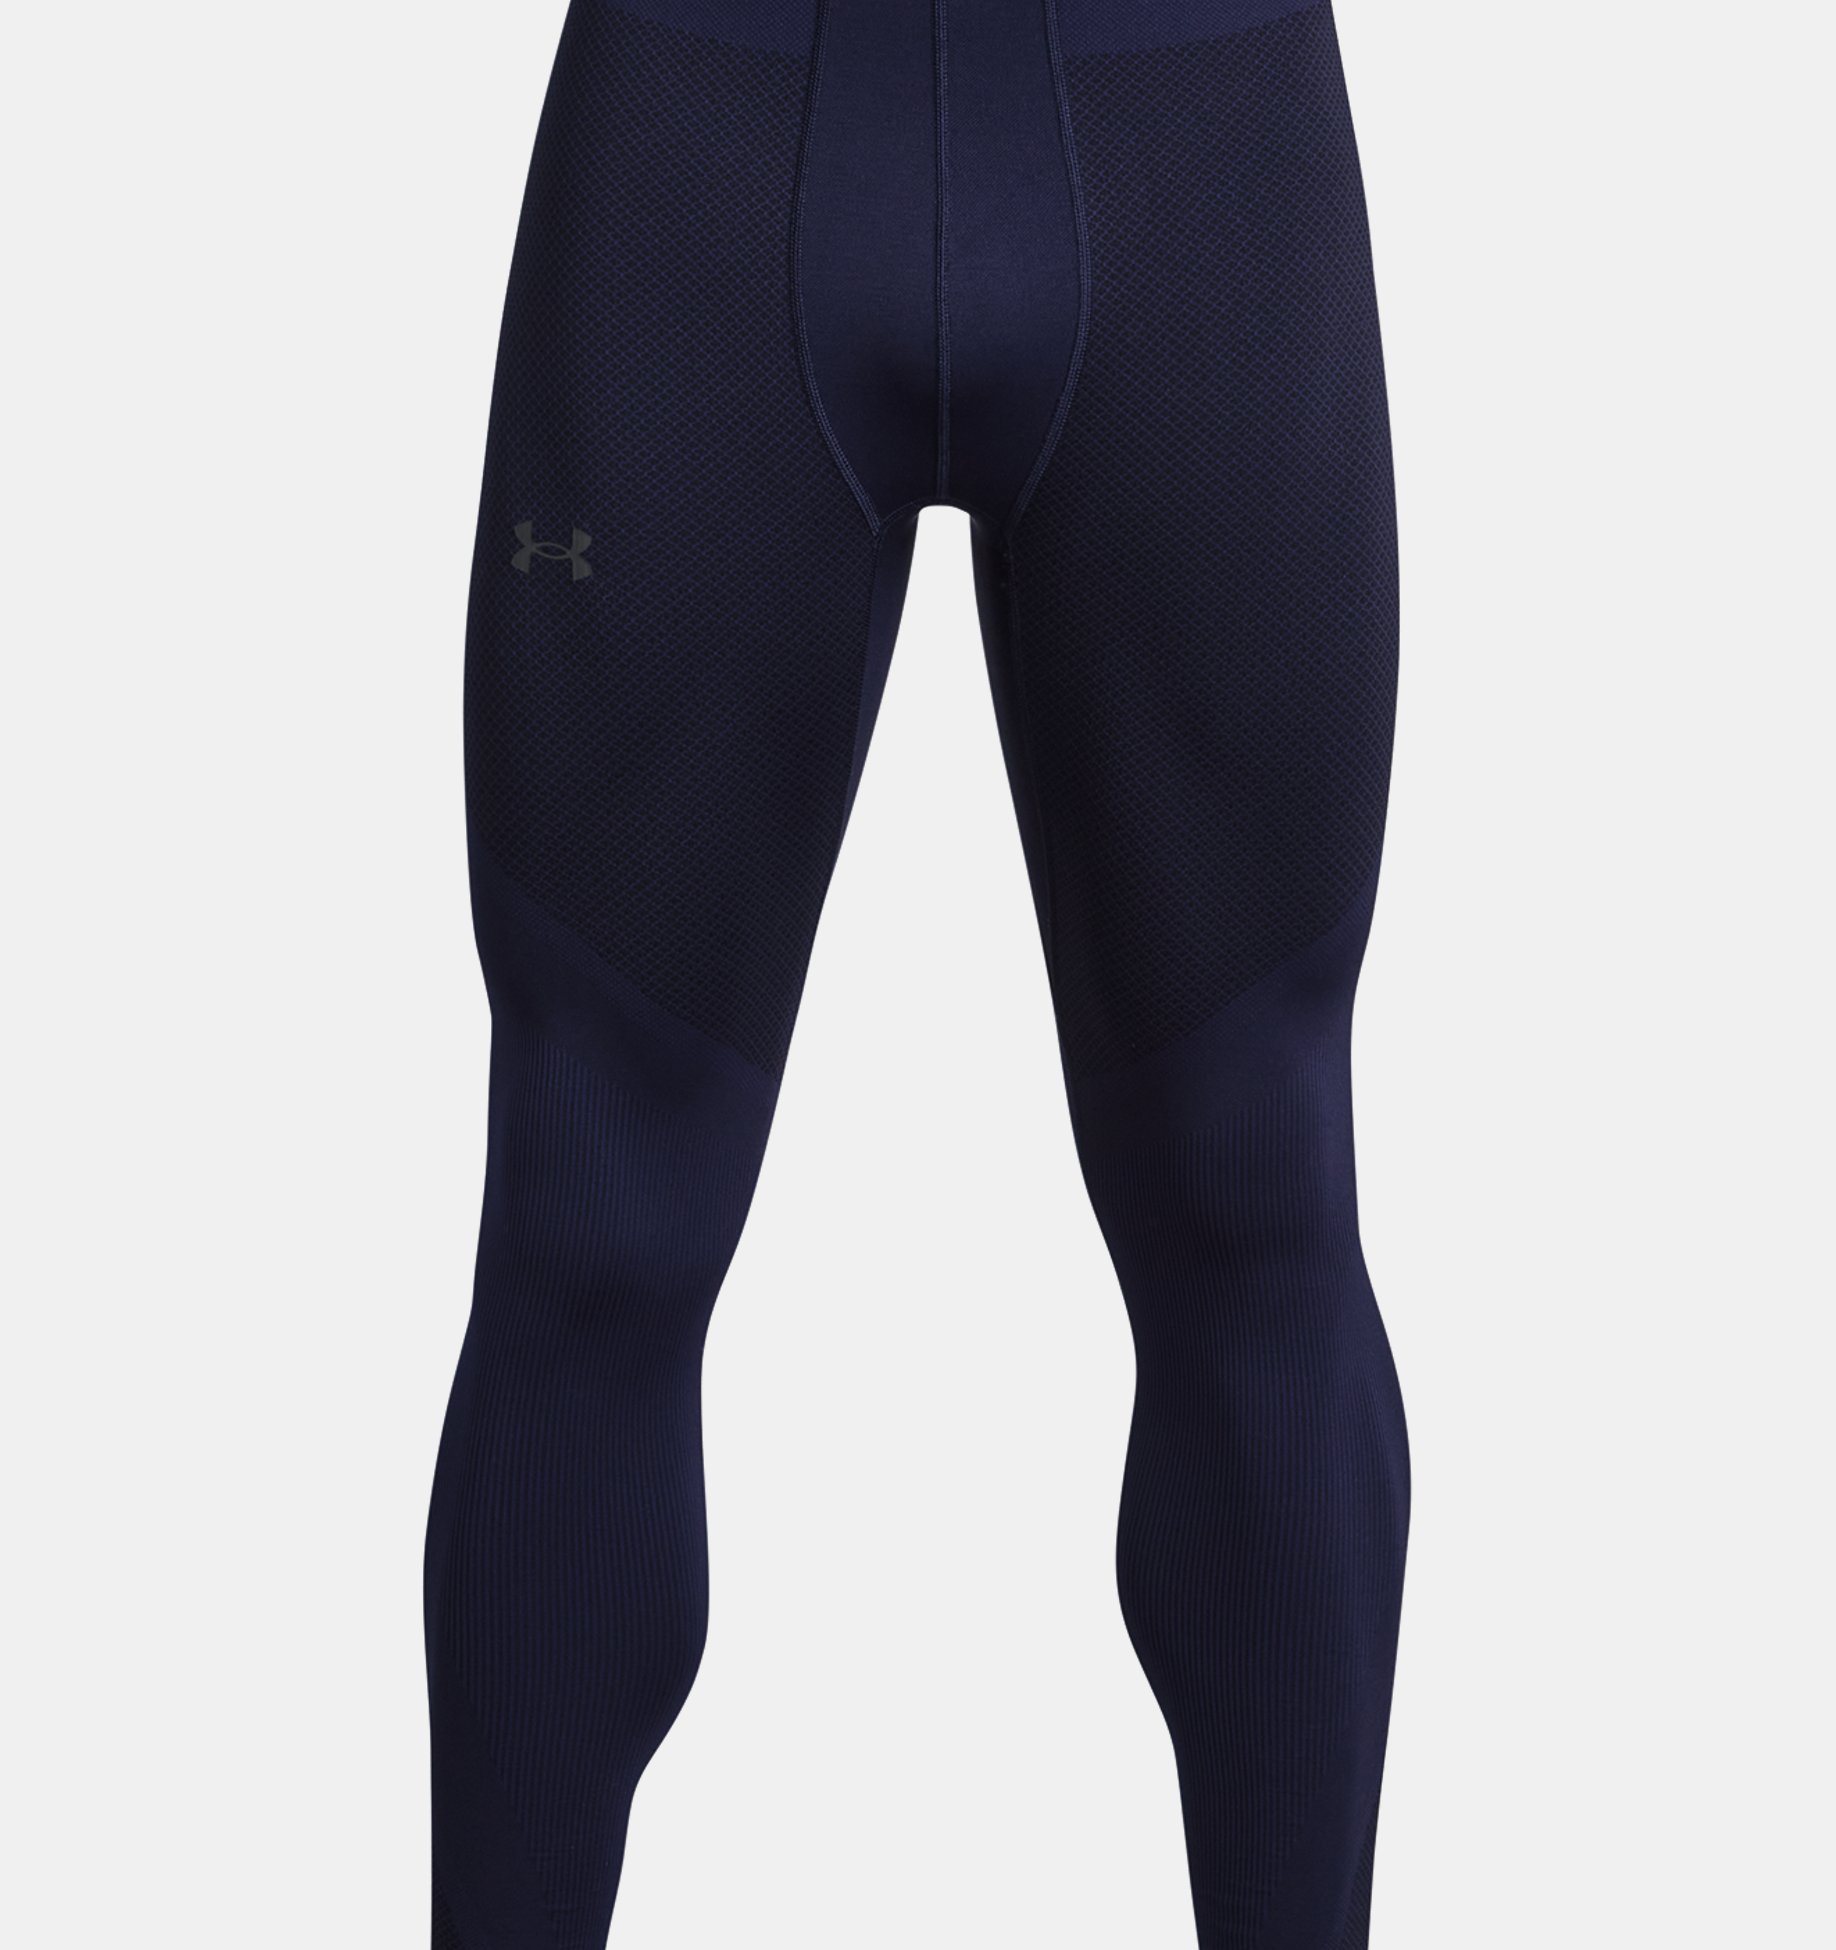 https://underarmour.scene7.com/is/image/Underarmour/PS1379284-410_HF?rp=standard-0pad|pdpZoomDesktop&scl=0.72&fmt=jpg&qlt=85&resMode=sharp2&cache=on,on&bgc=f0f0f0&wid=1836&hei=1950&size=1500,1500